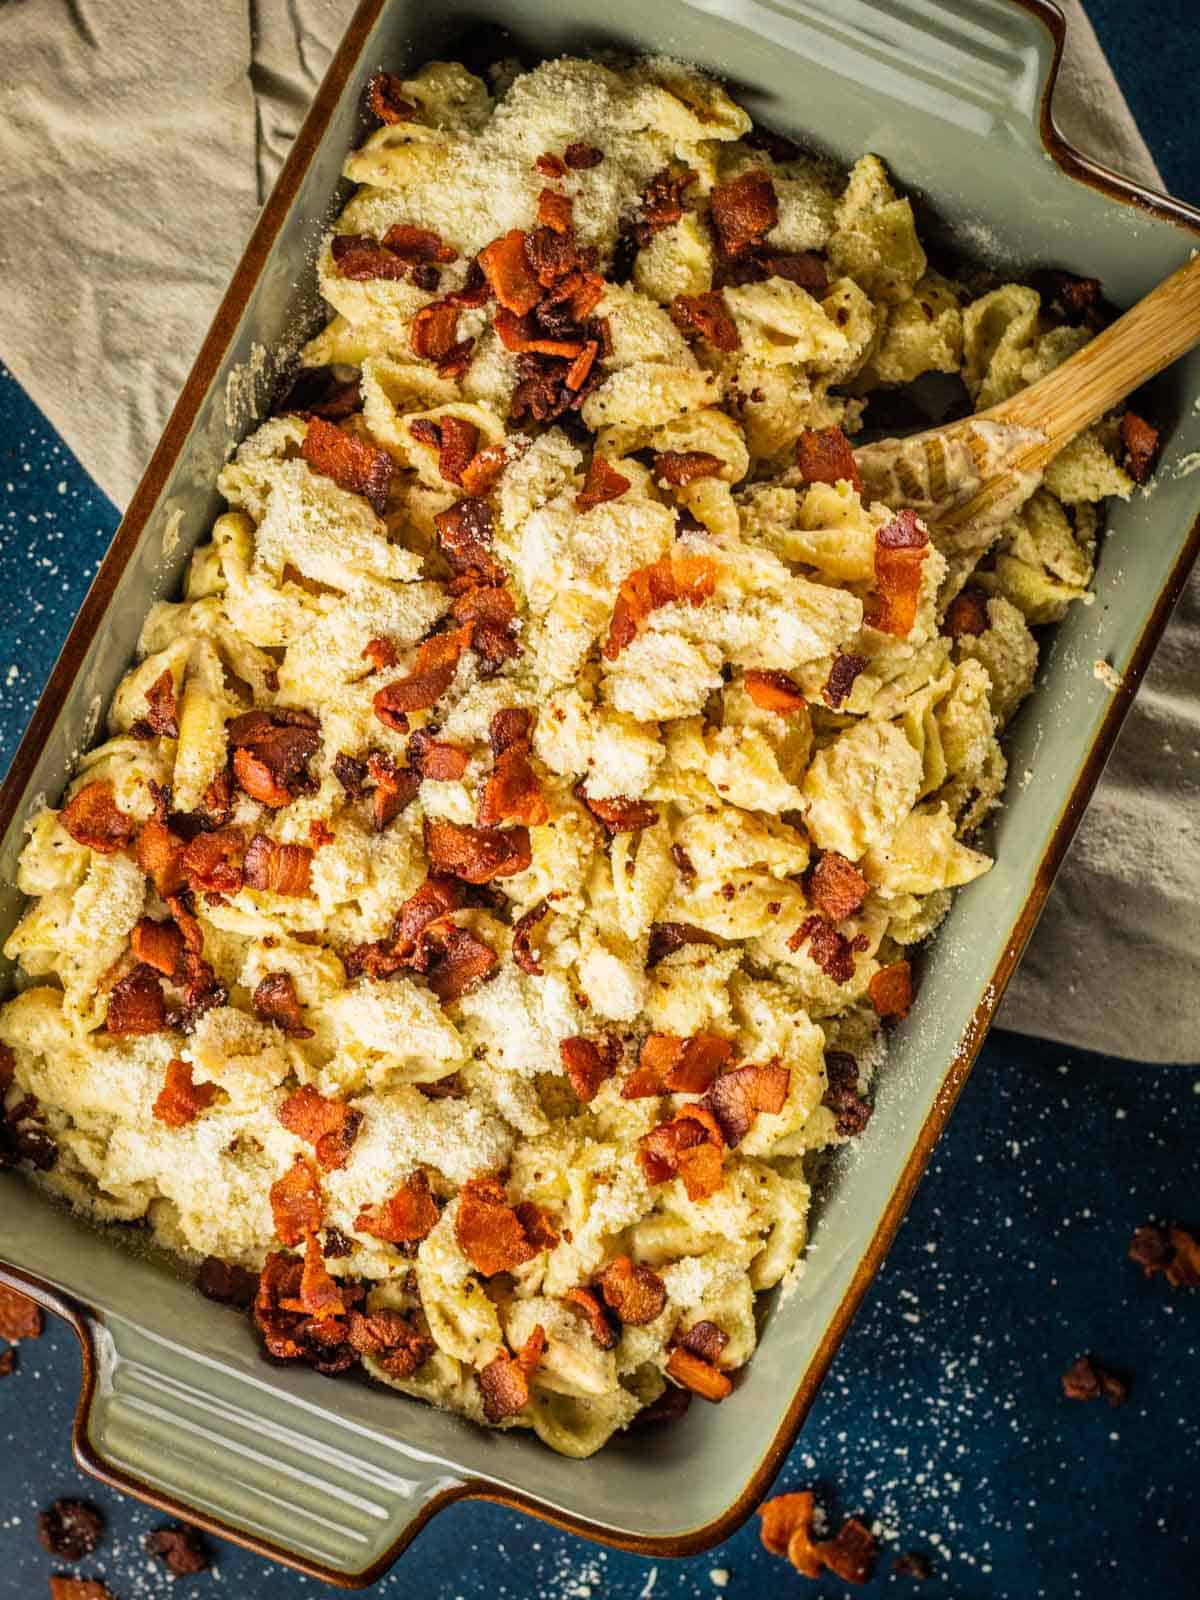 rectangle ceramic dish of shell pasta with creamy white sauce, crispy bacon pieces and grated parmesan